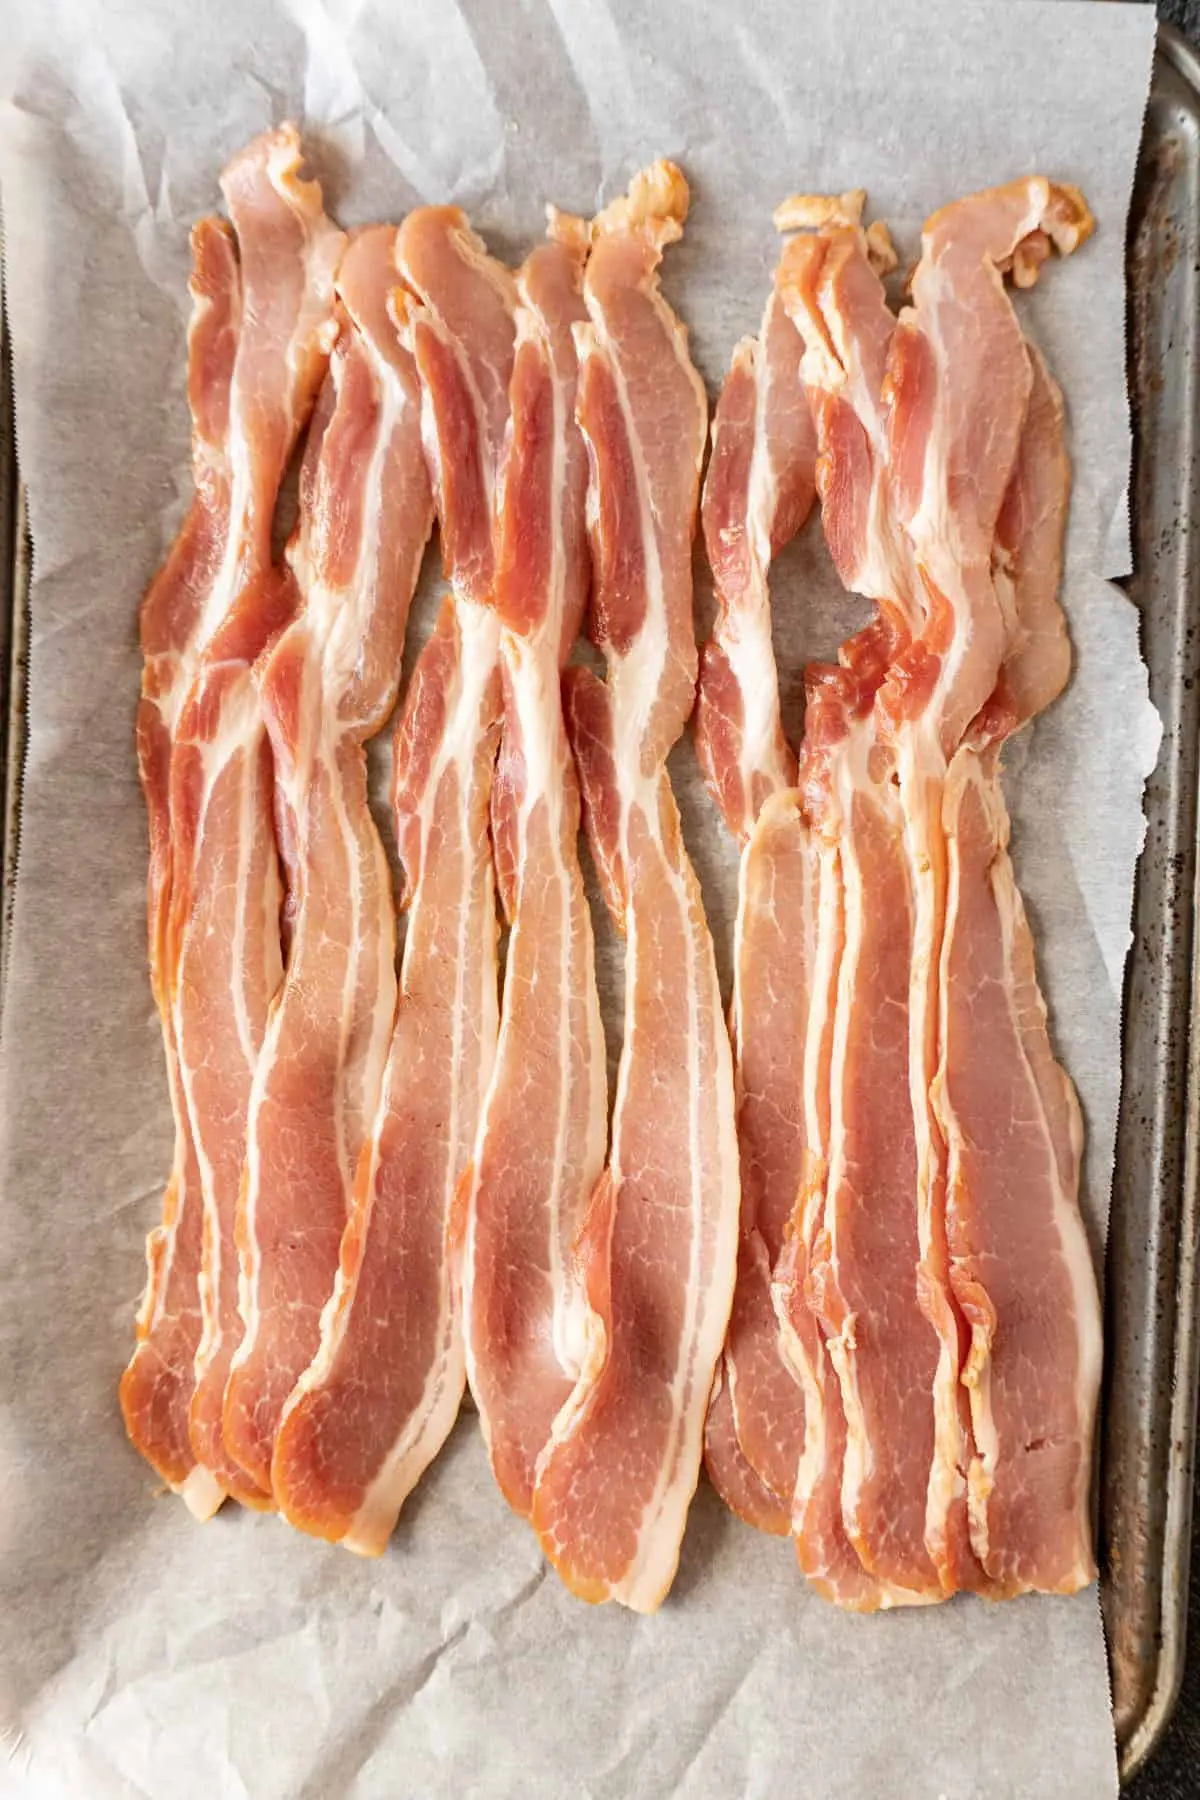 smoked bacon past use by date - Can bacon be used after the use by date UK